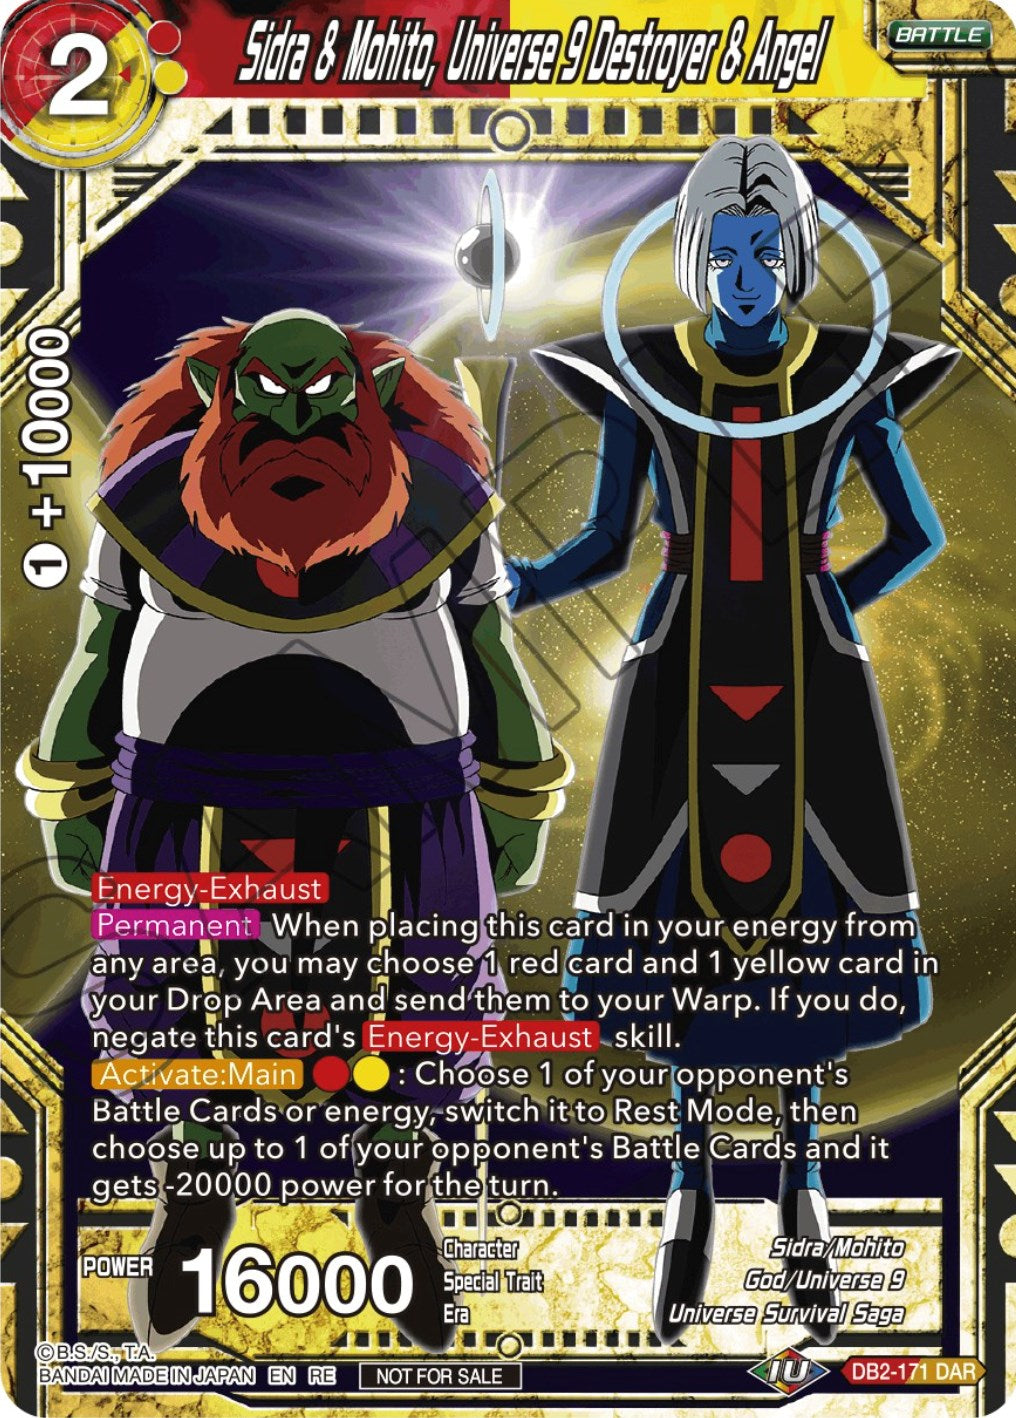 Sidra & Mohito, Universe 9 Destroyer & Angel (Championship Selection Pack 2023 Vol.2) (Silver Foil) (DB2-171) [Tournament Promotion Cards] | Pegasus Games WI